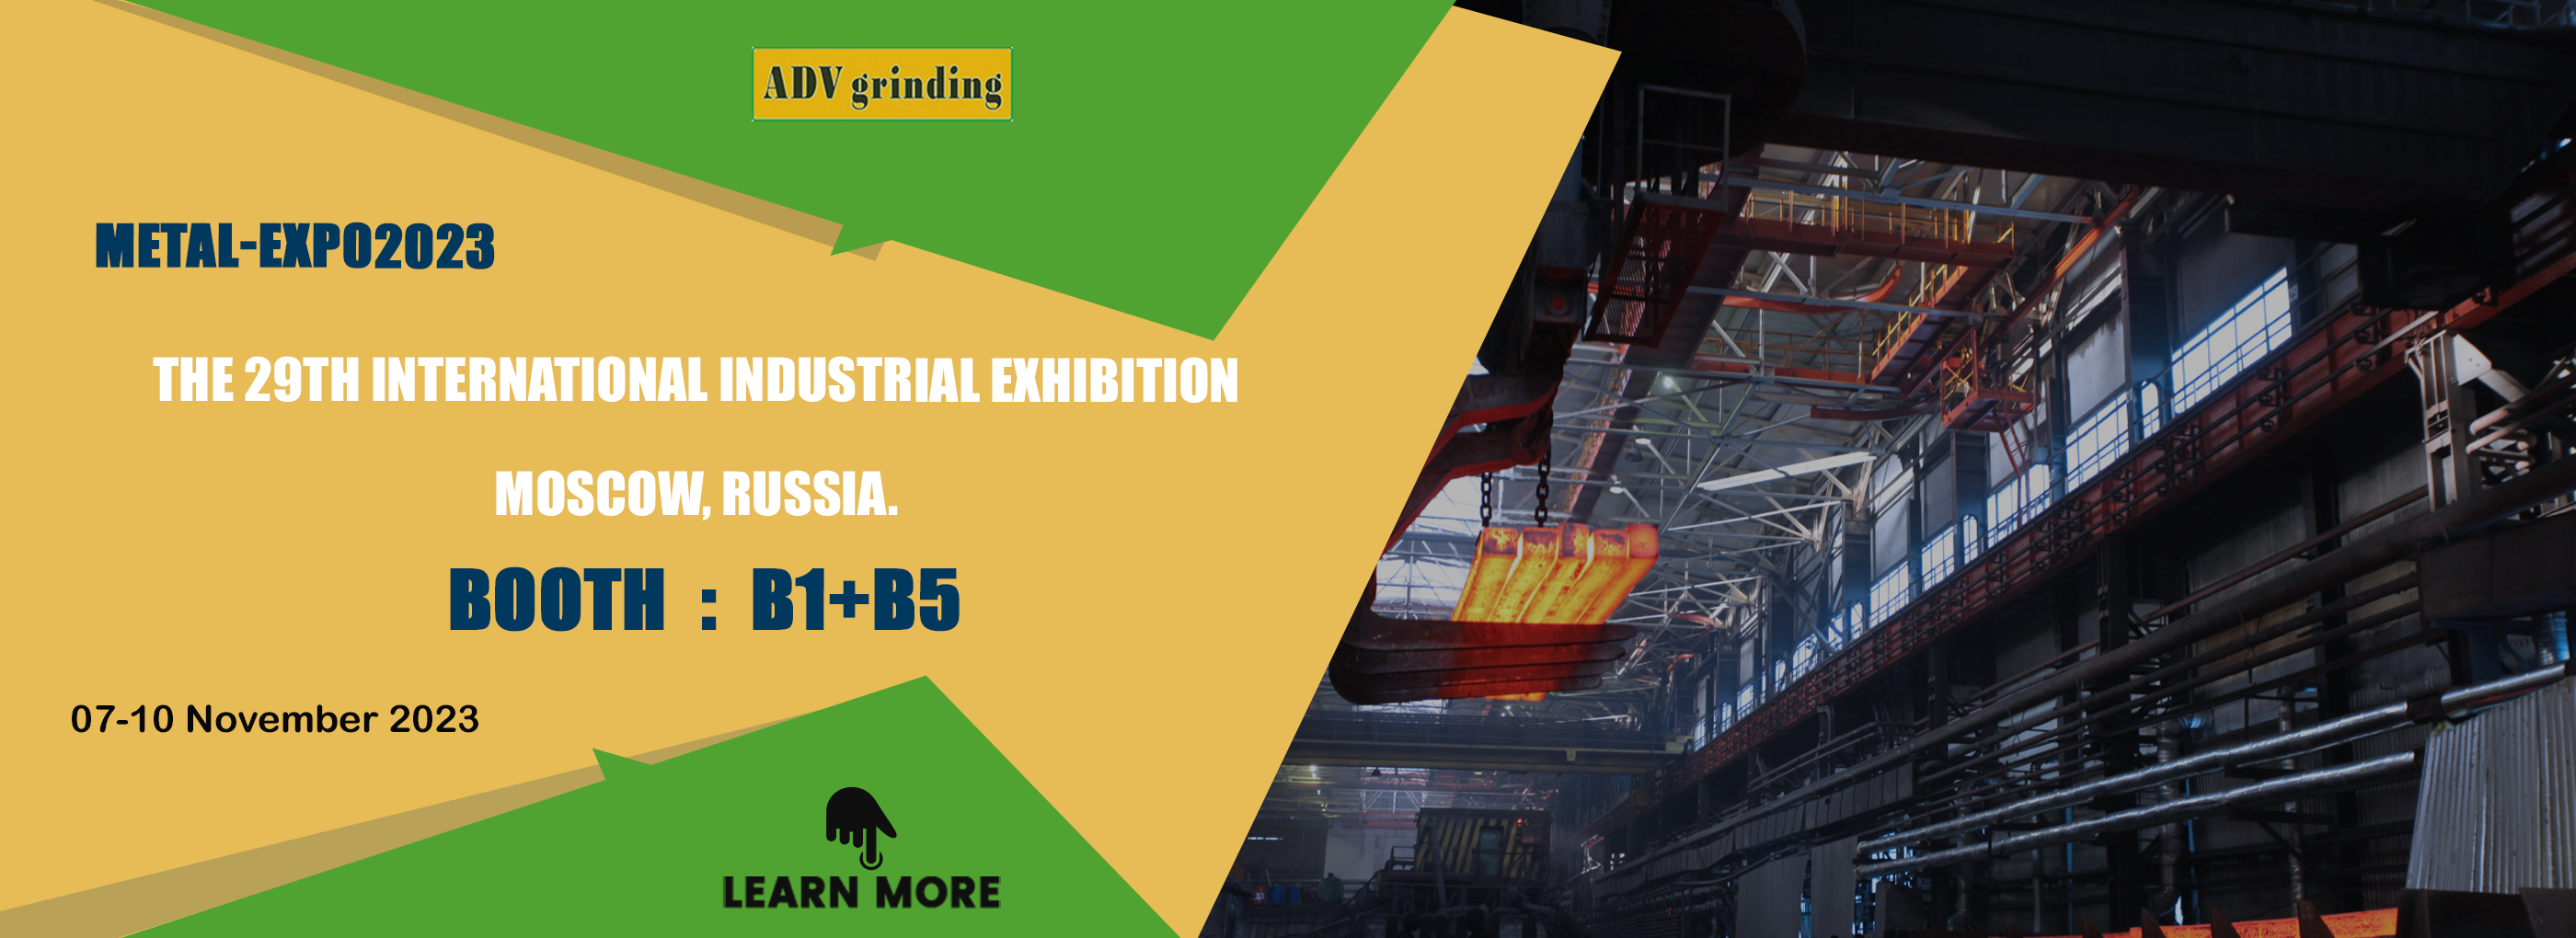 adv-Moscow Exhibition1020-223.png